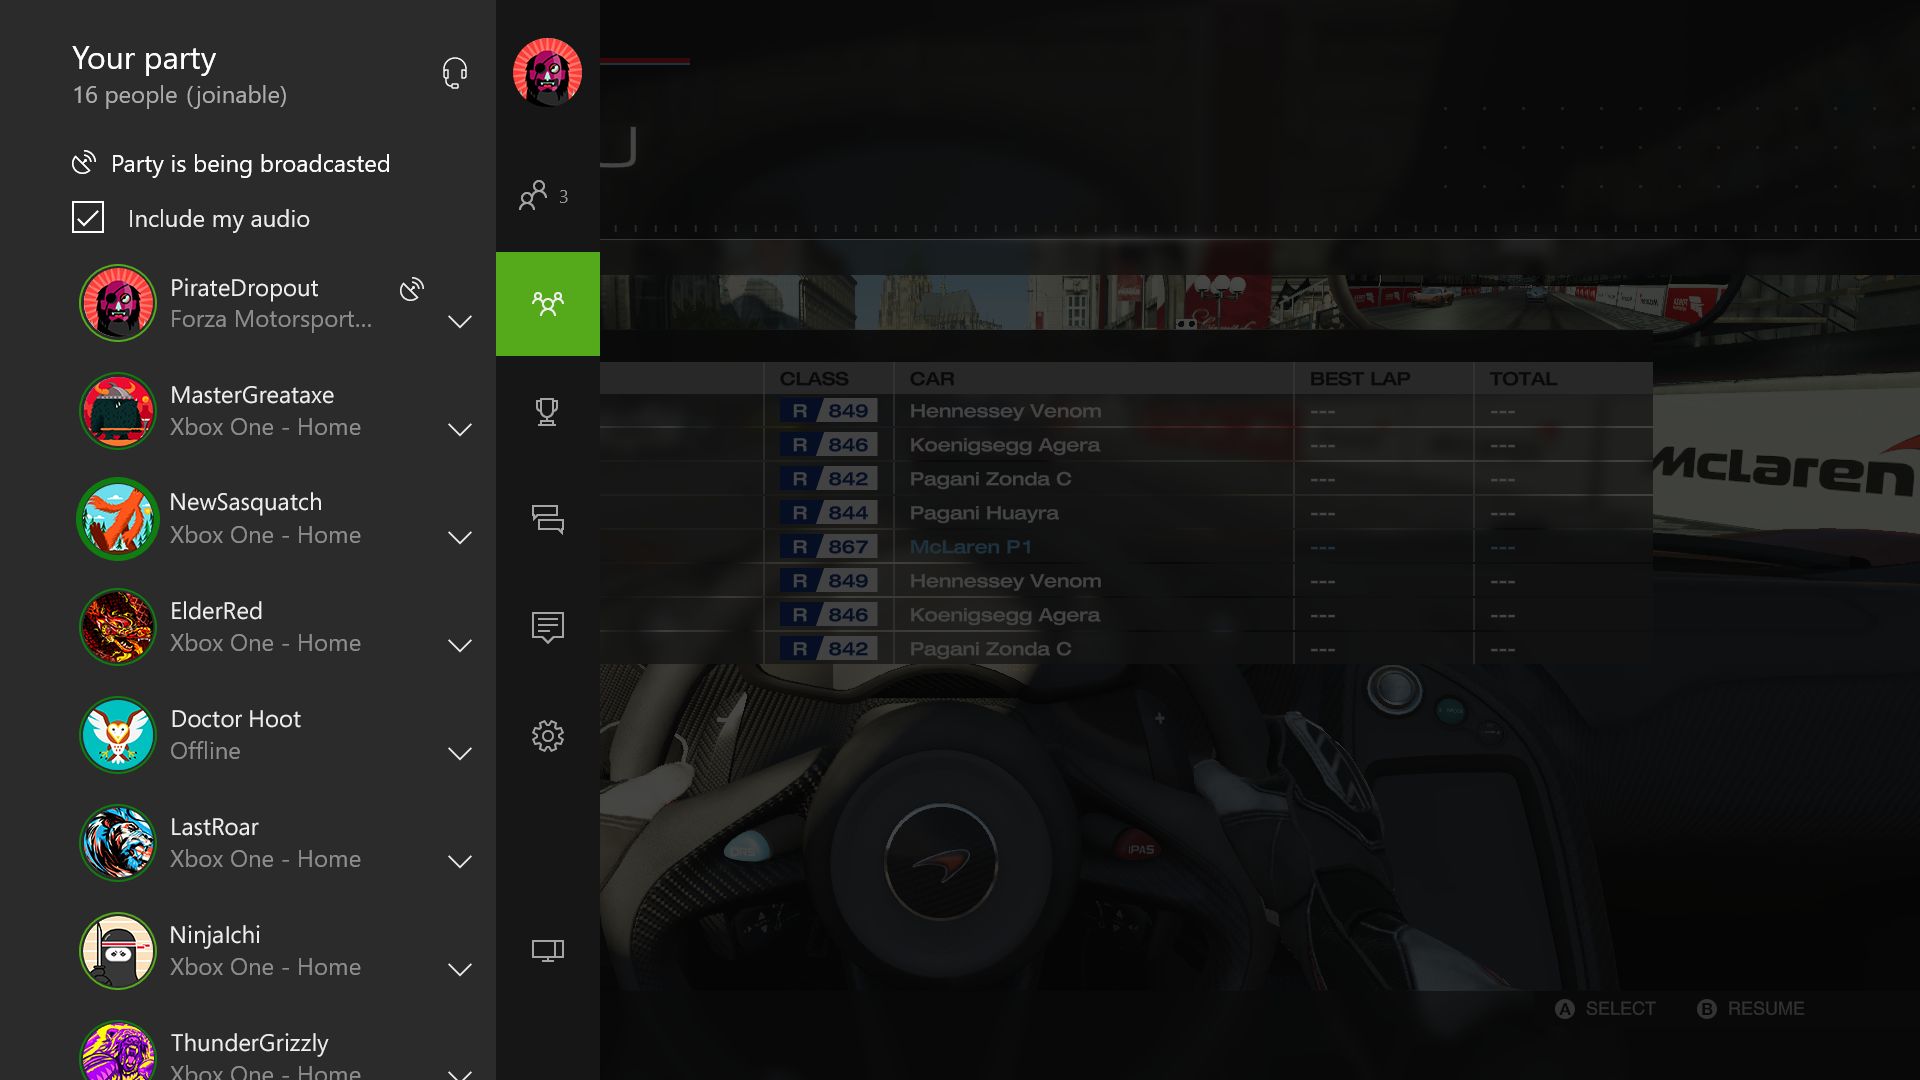 Microsoft unveils Xbox One DVR features, enabling recording and